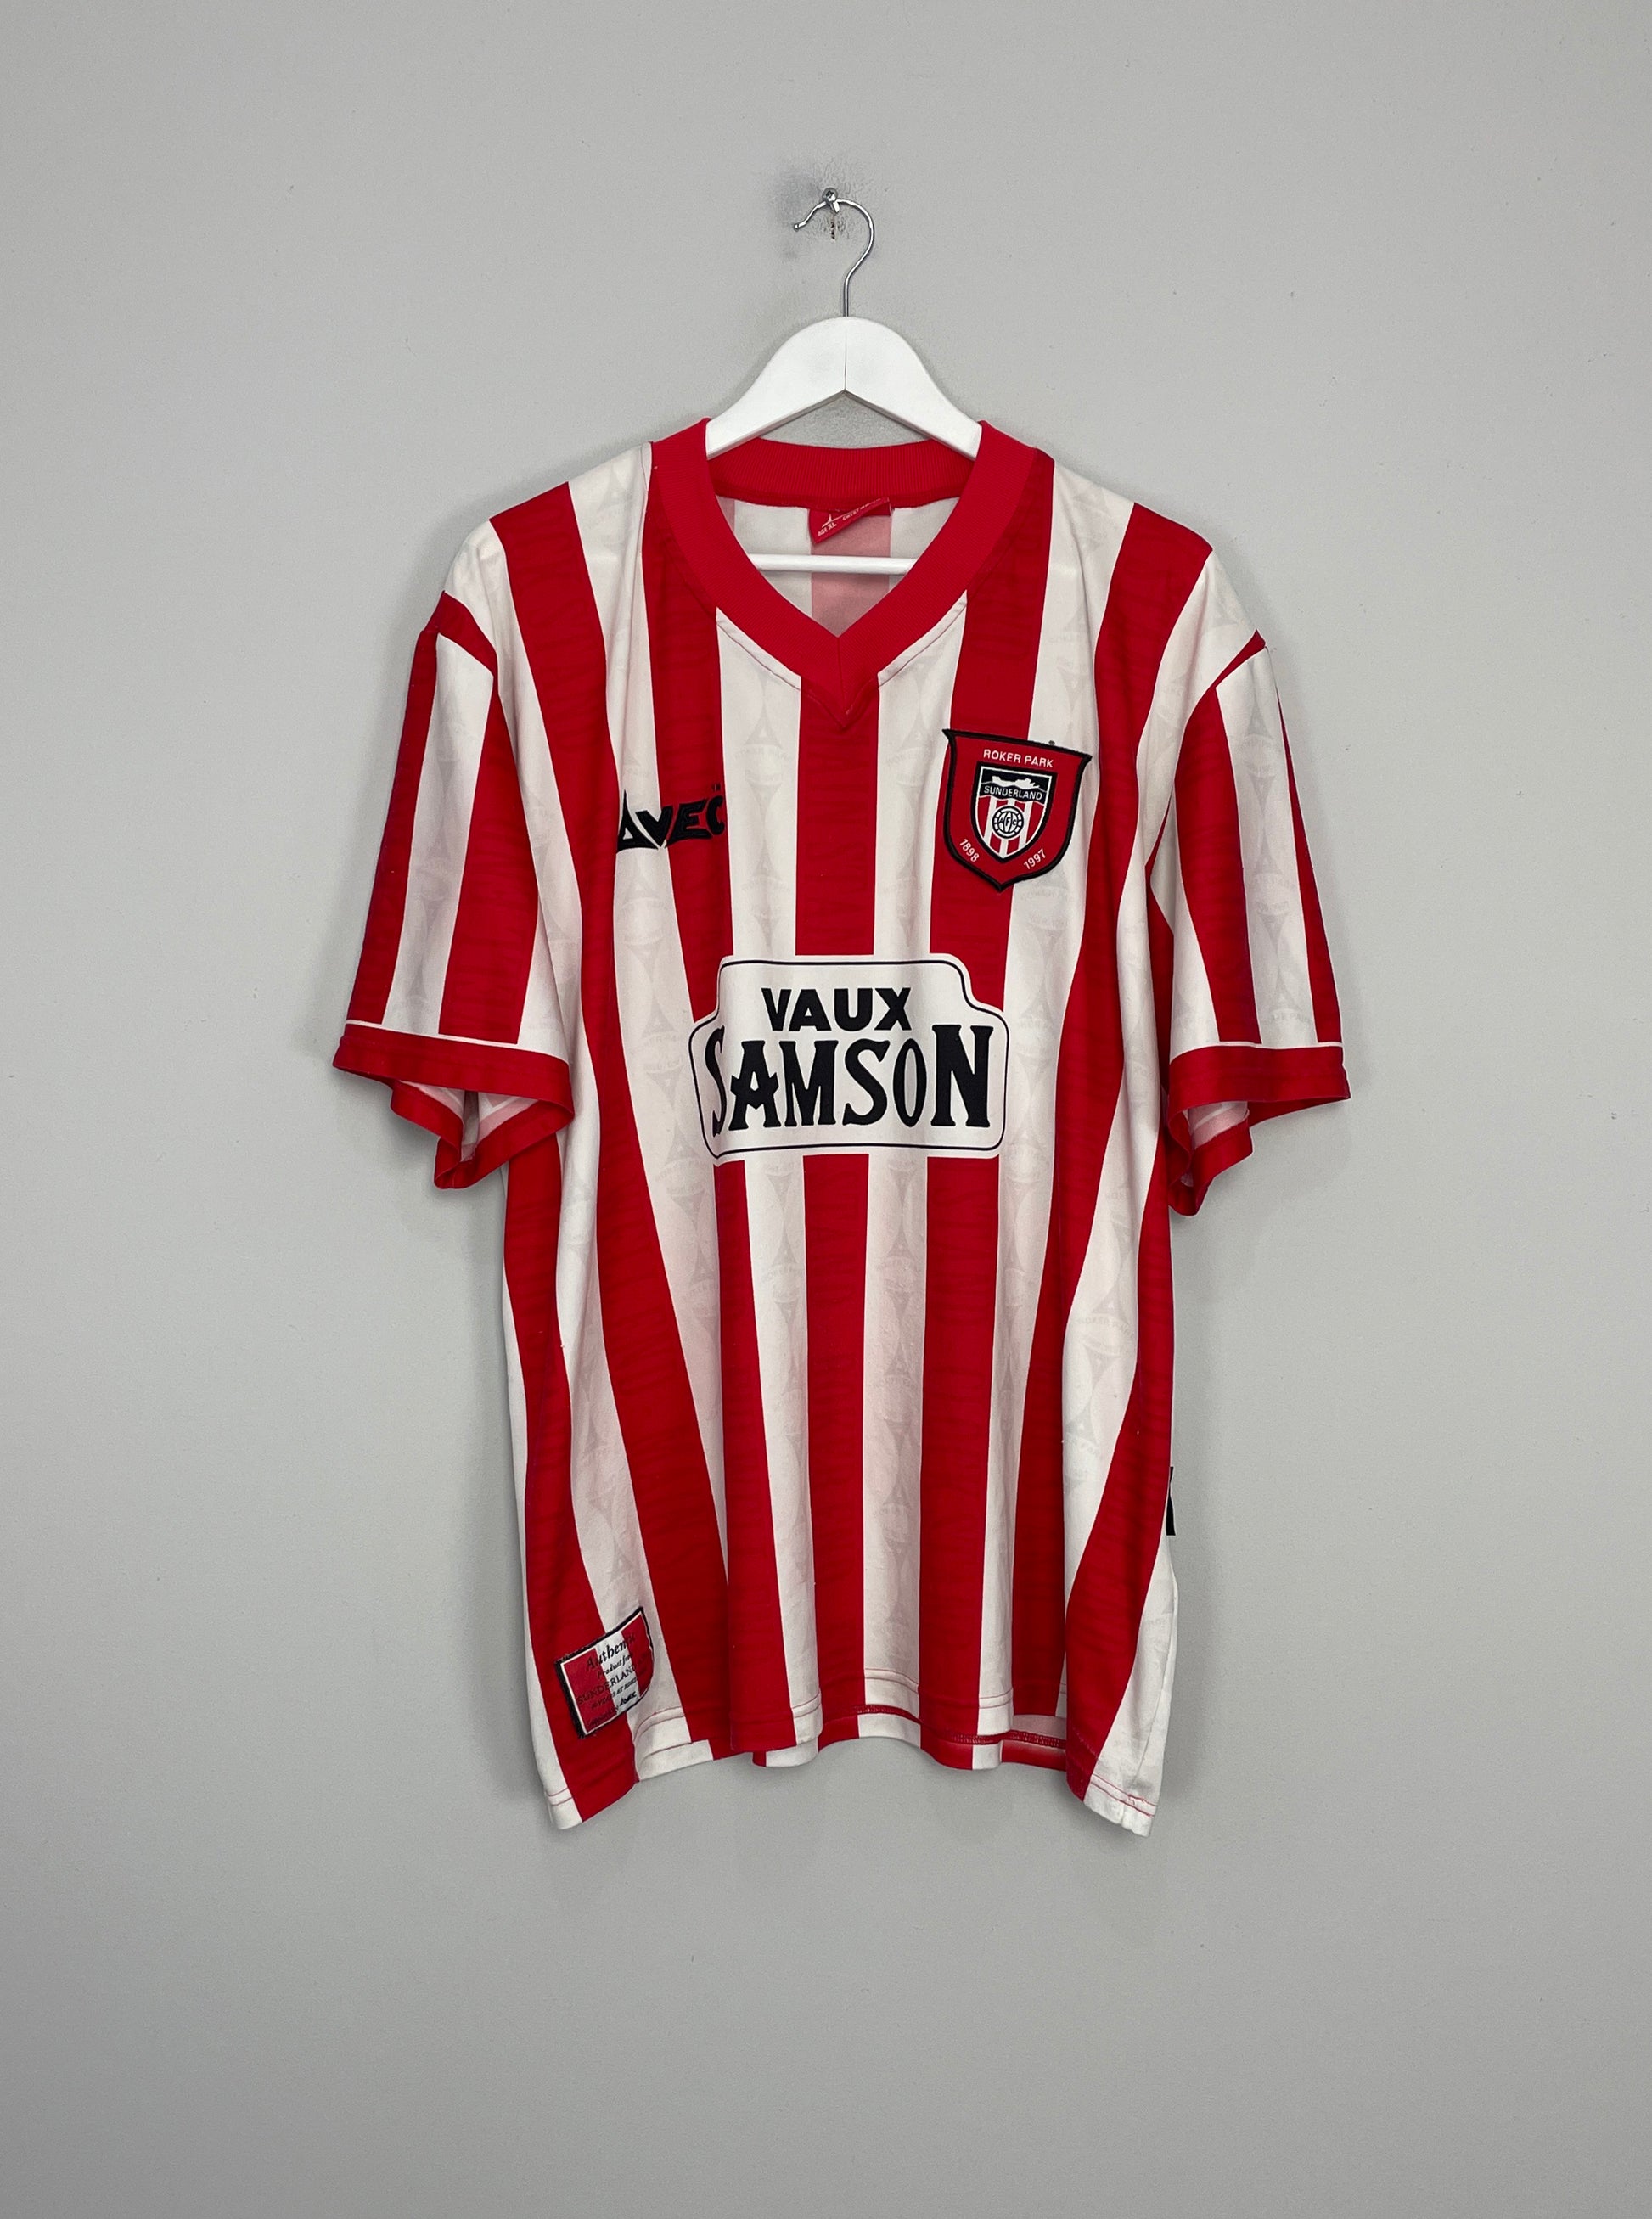 Image of the Sunderland shirt from the 1996/97 season